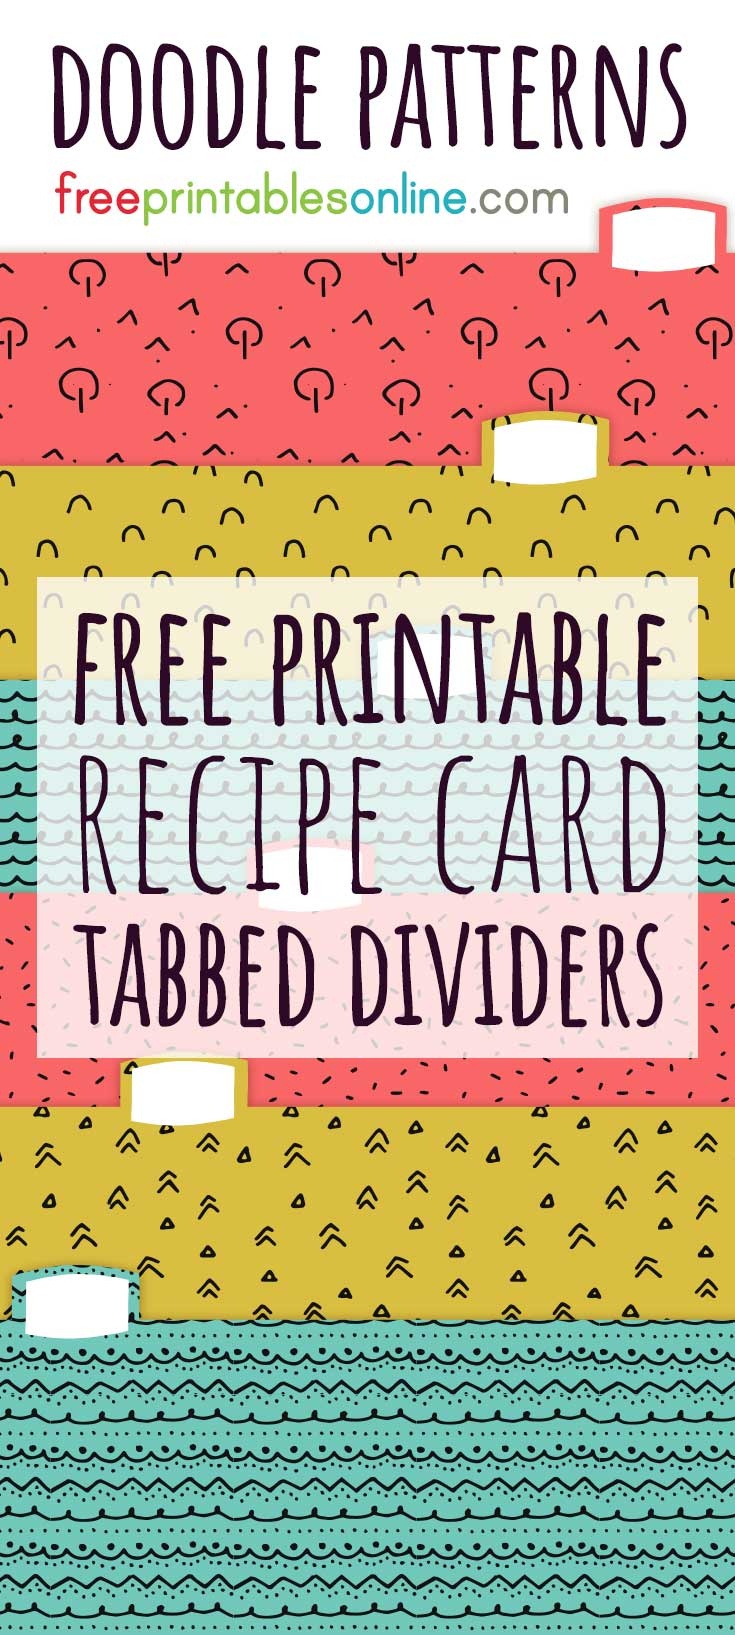 Doodle Patterns Recipe Card Box Dividers - Free Printables Online - Free Printable Recipe Dividers